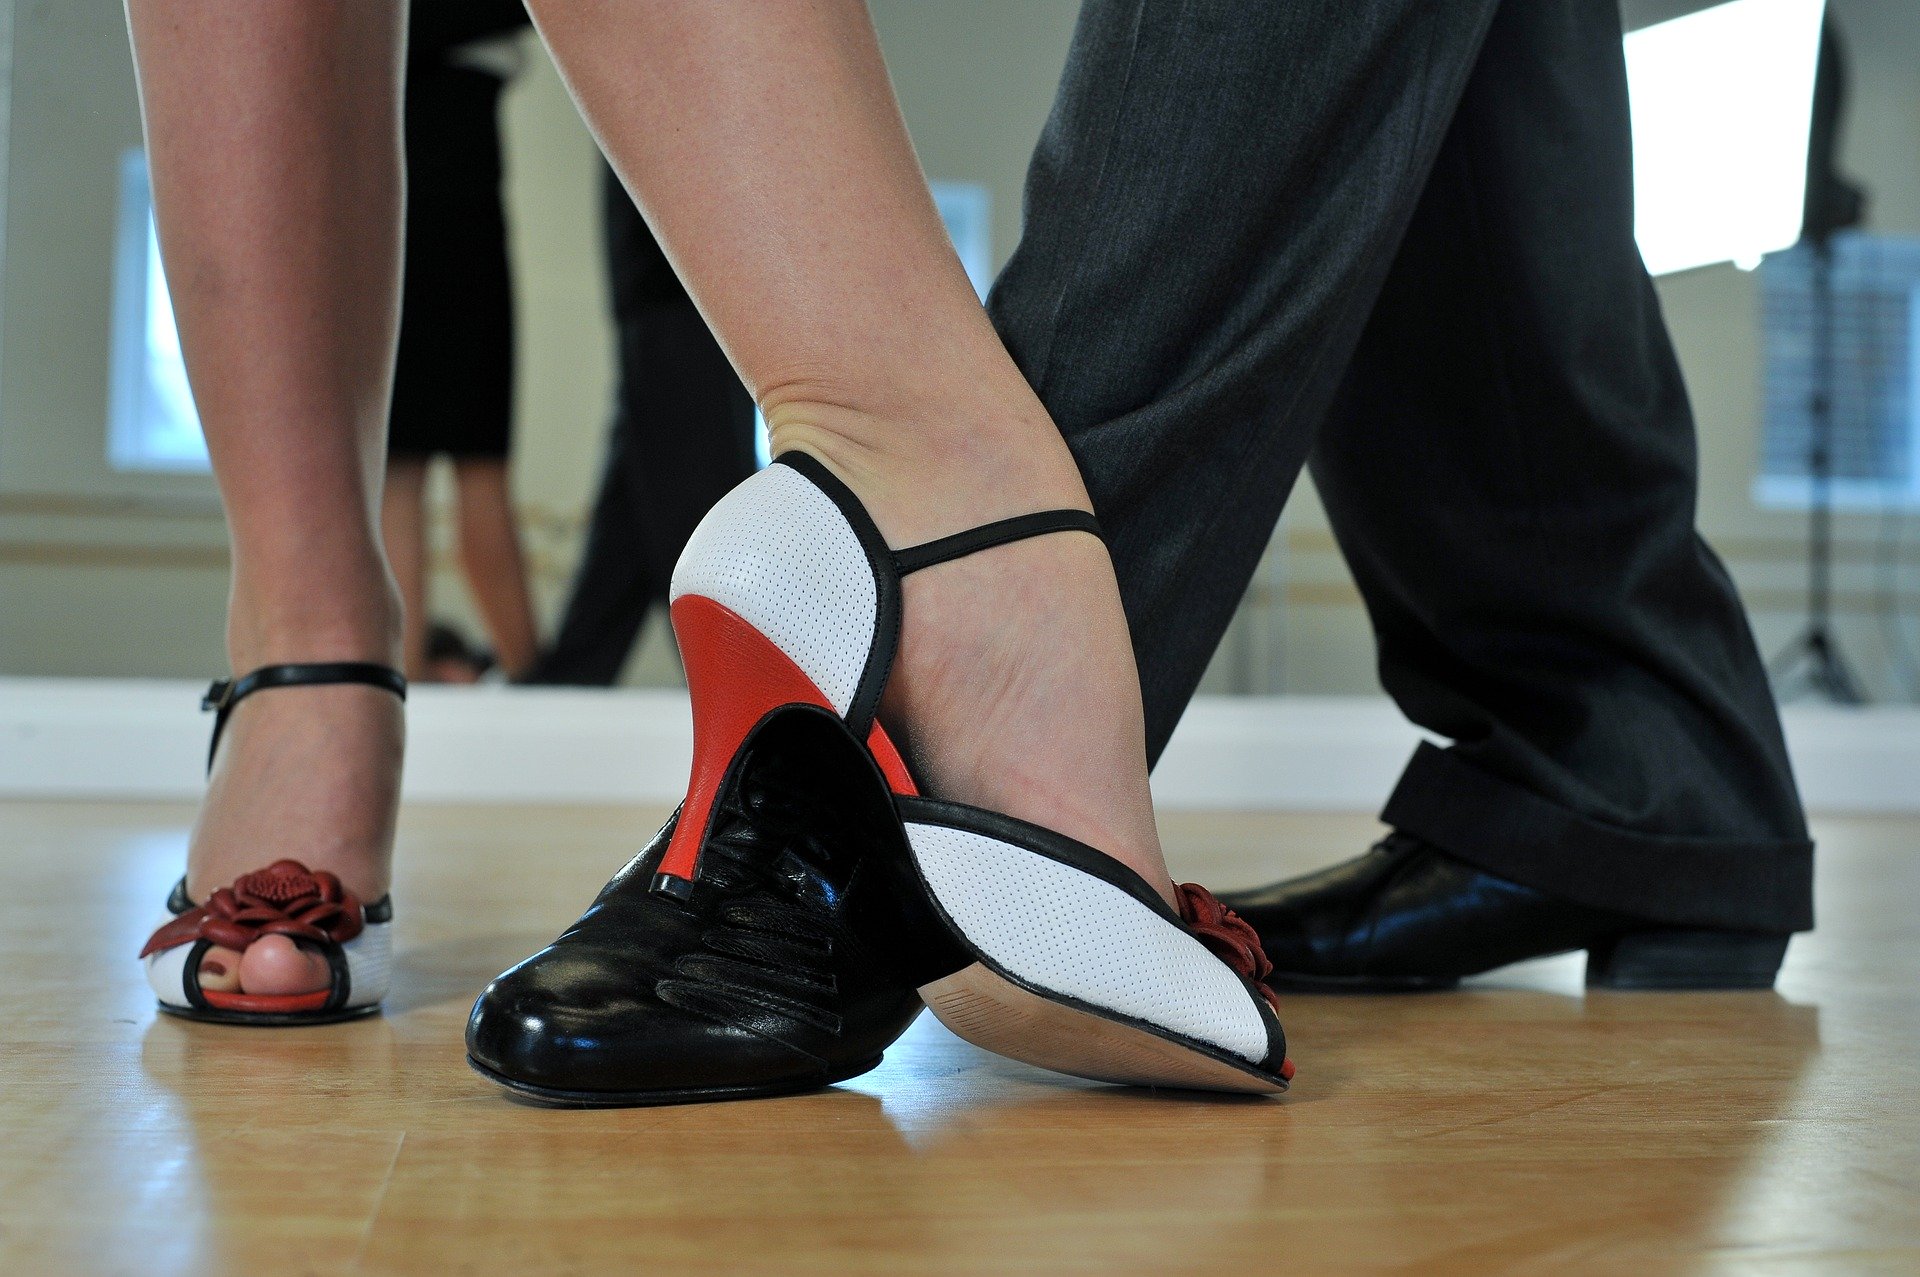 close up of man and woman's dancing feet in dress shoes